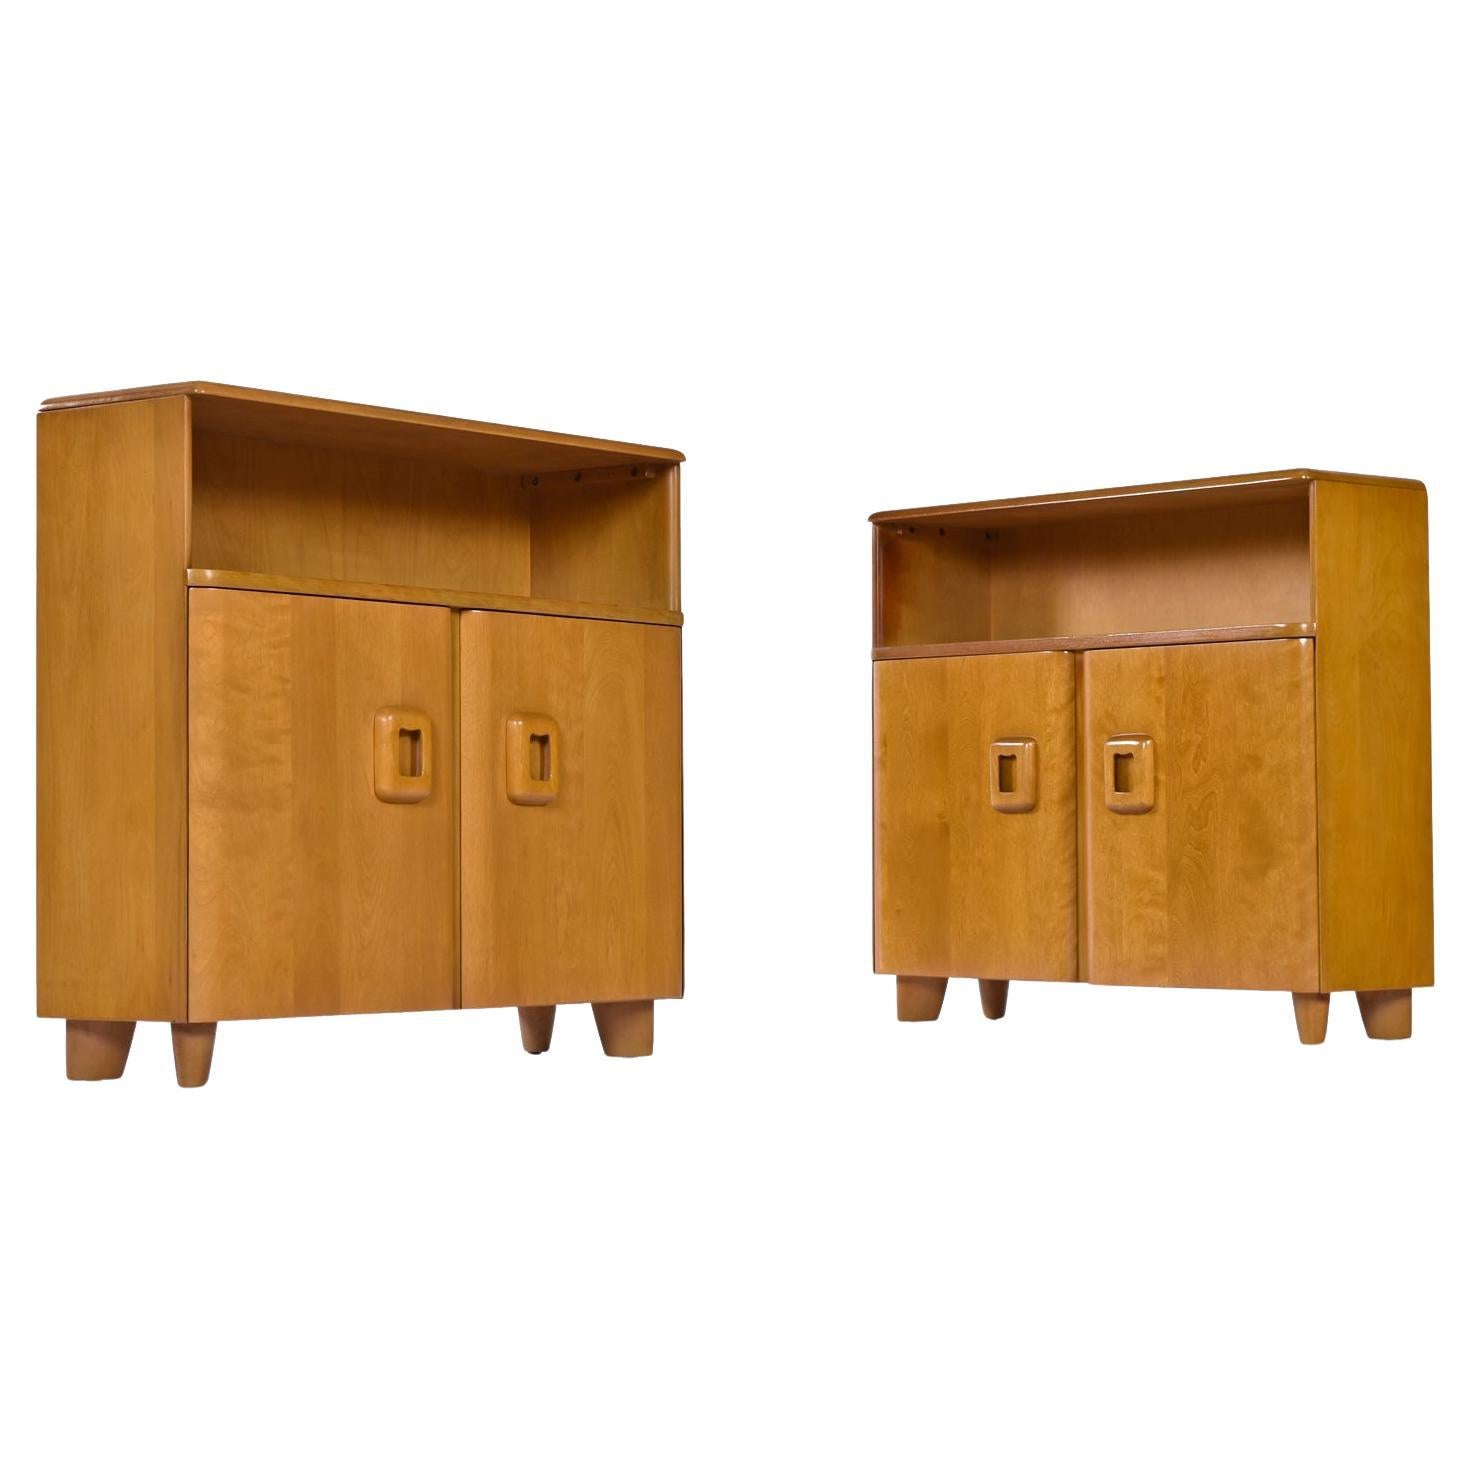 Pair of Vintage Restored Solid Maple Heywood Wakefield Wheat Bookcase Cabinets For Sale